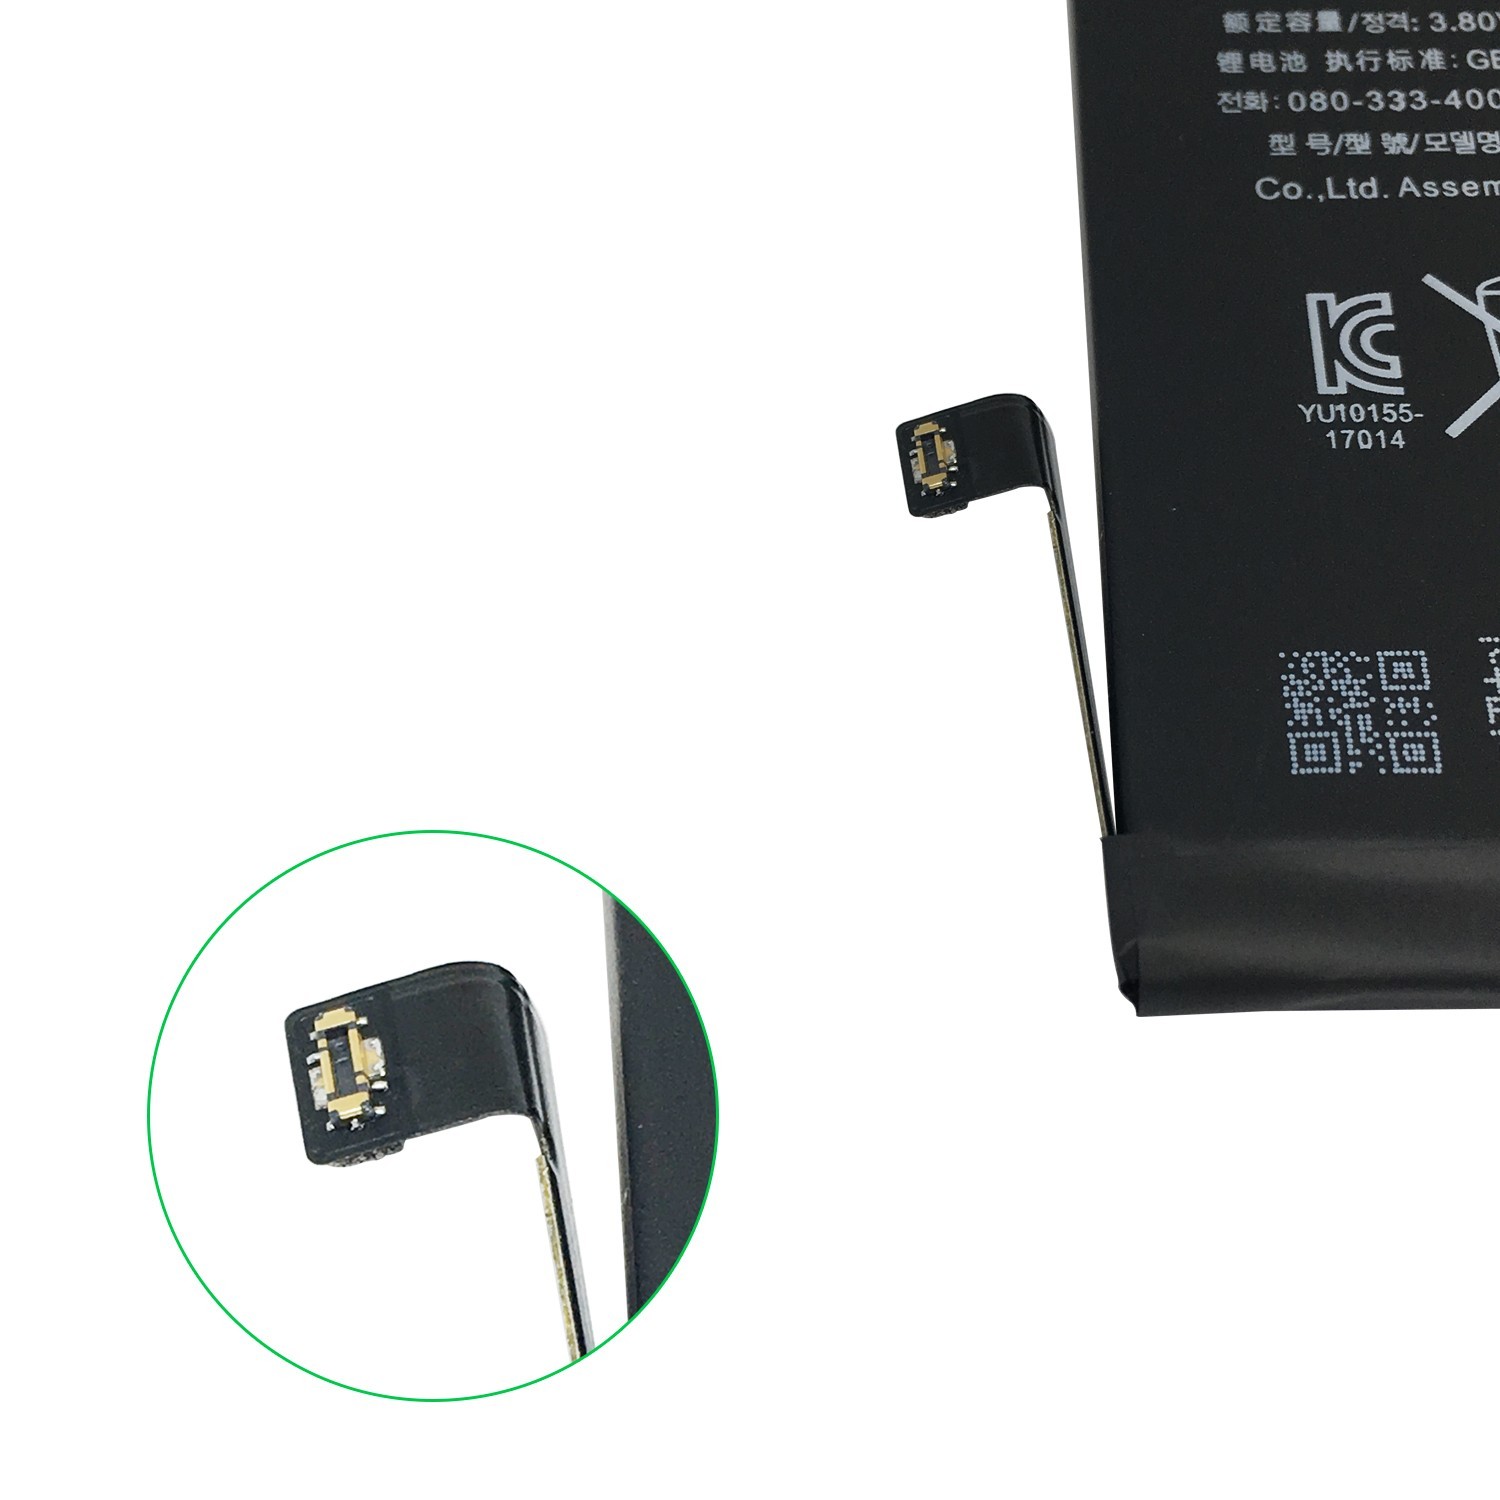 Zero cycle long life mobile phone battery iphone 8 battery for repair